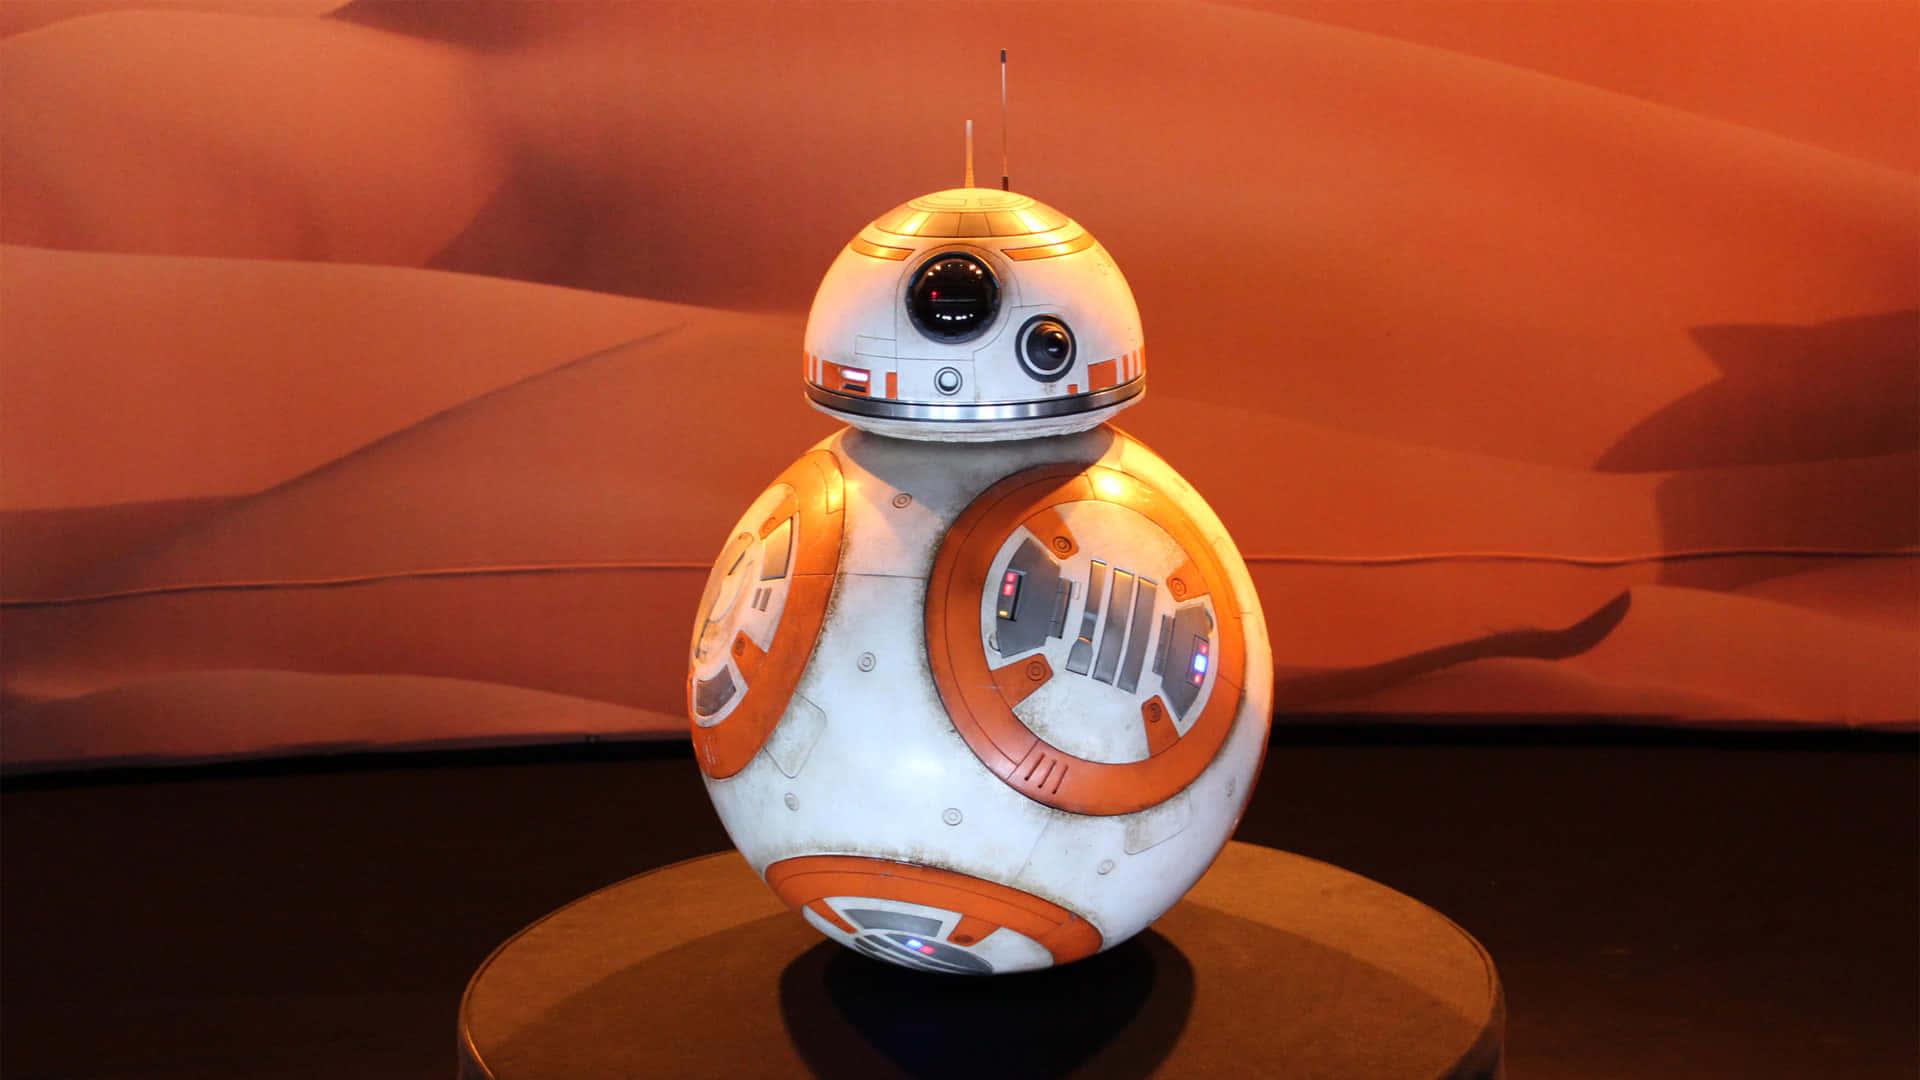 The lovable and adventurous BB-8 droid Wallpaper